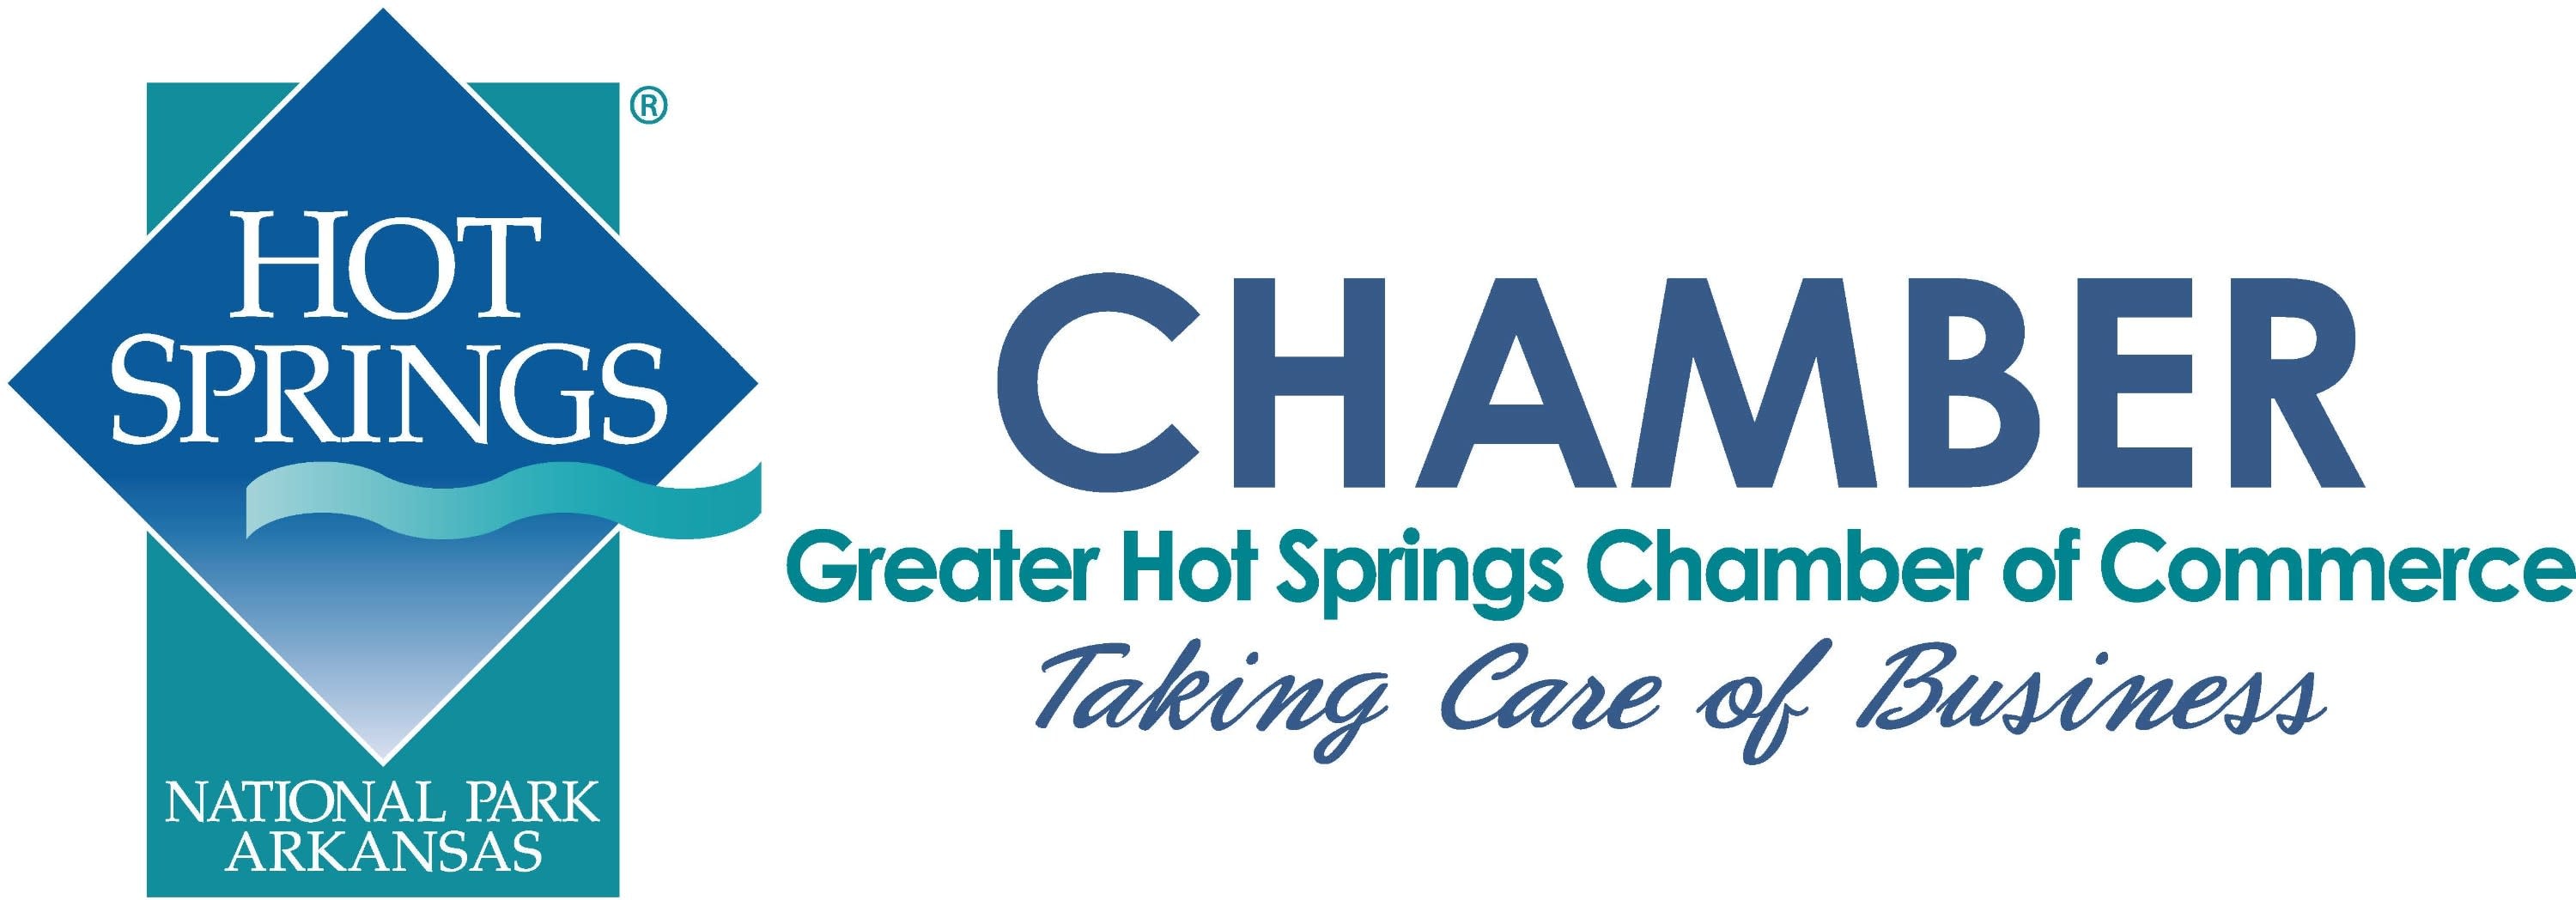 Greater Hot Springs Chamber of Commerce